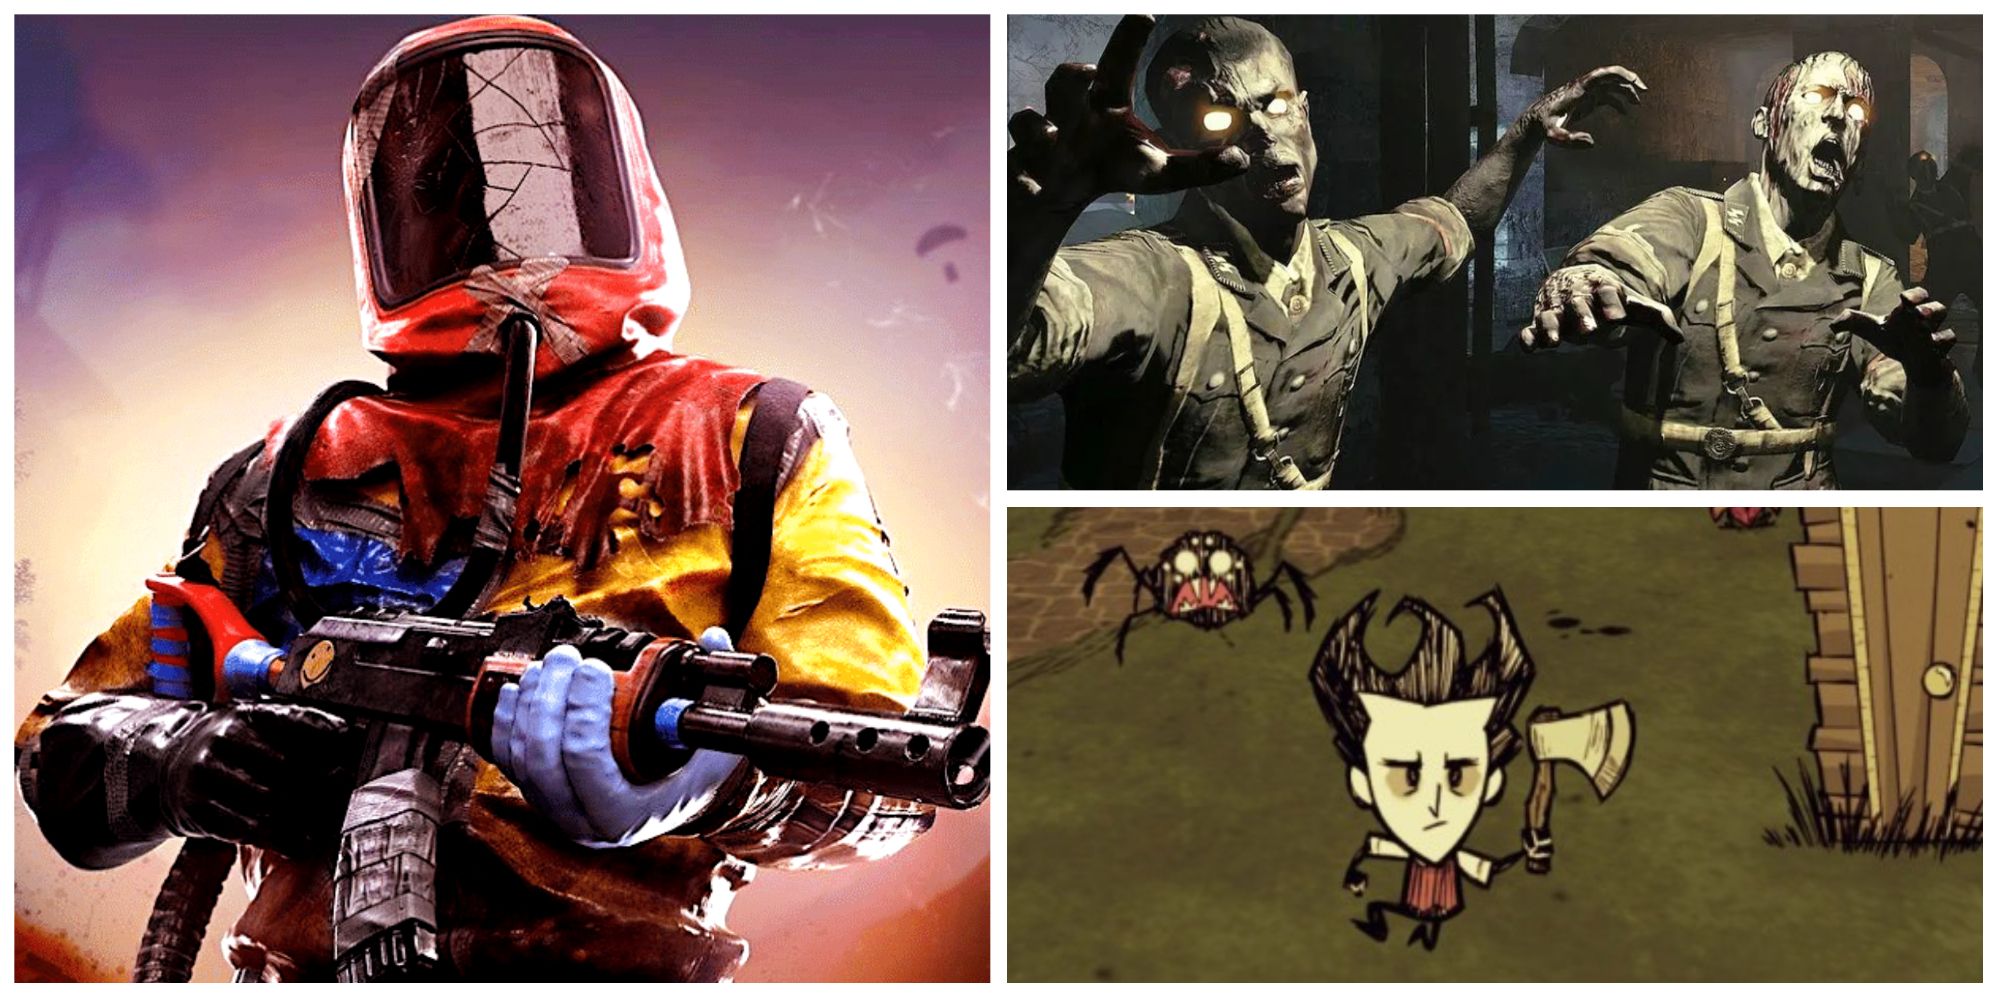 rust, call of duty zombies, don't starve as survival games